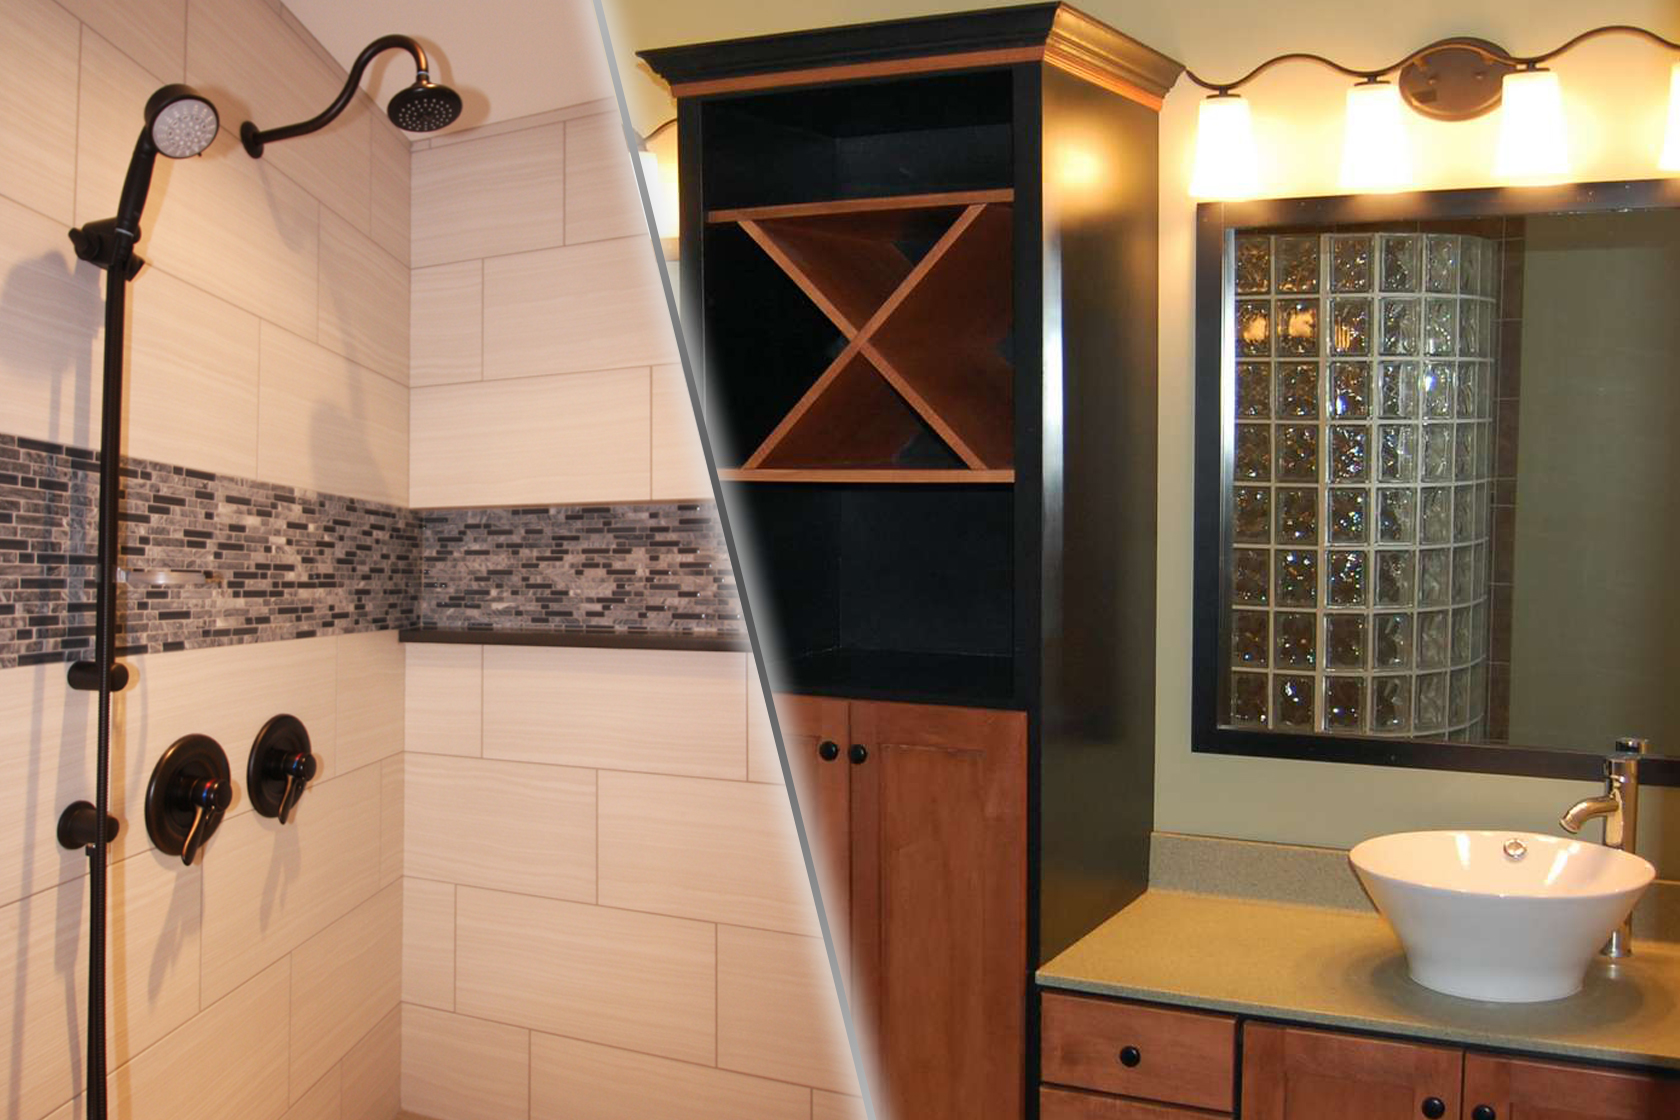 Bathroom design options for your new home construction.